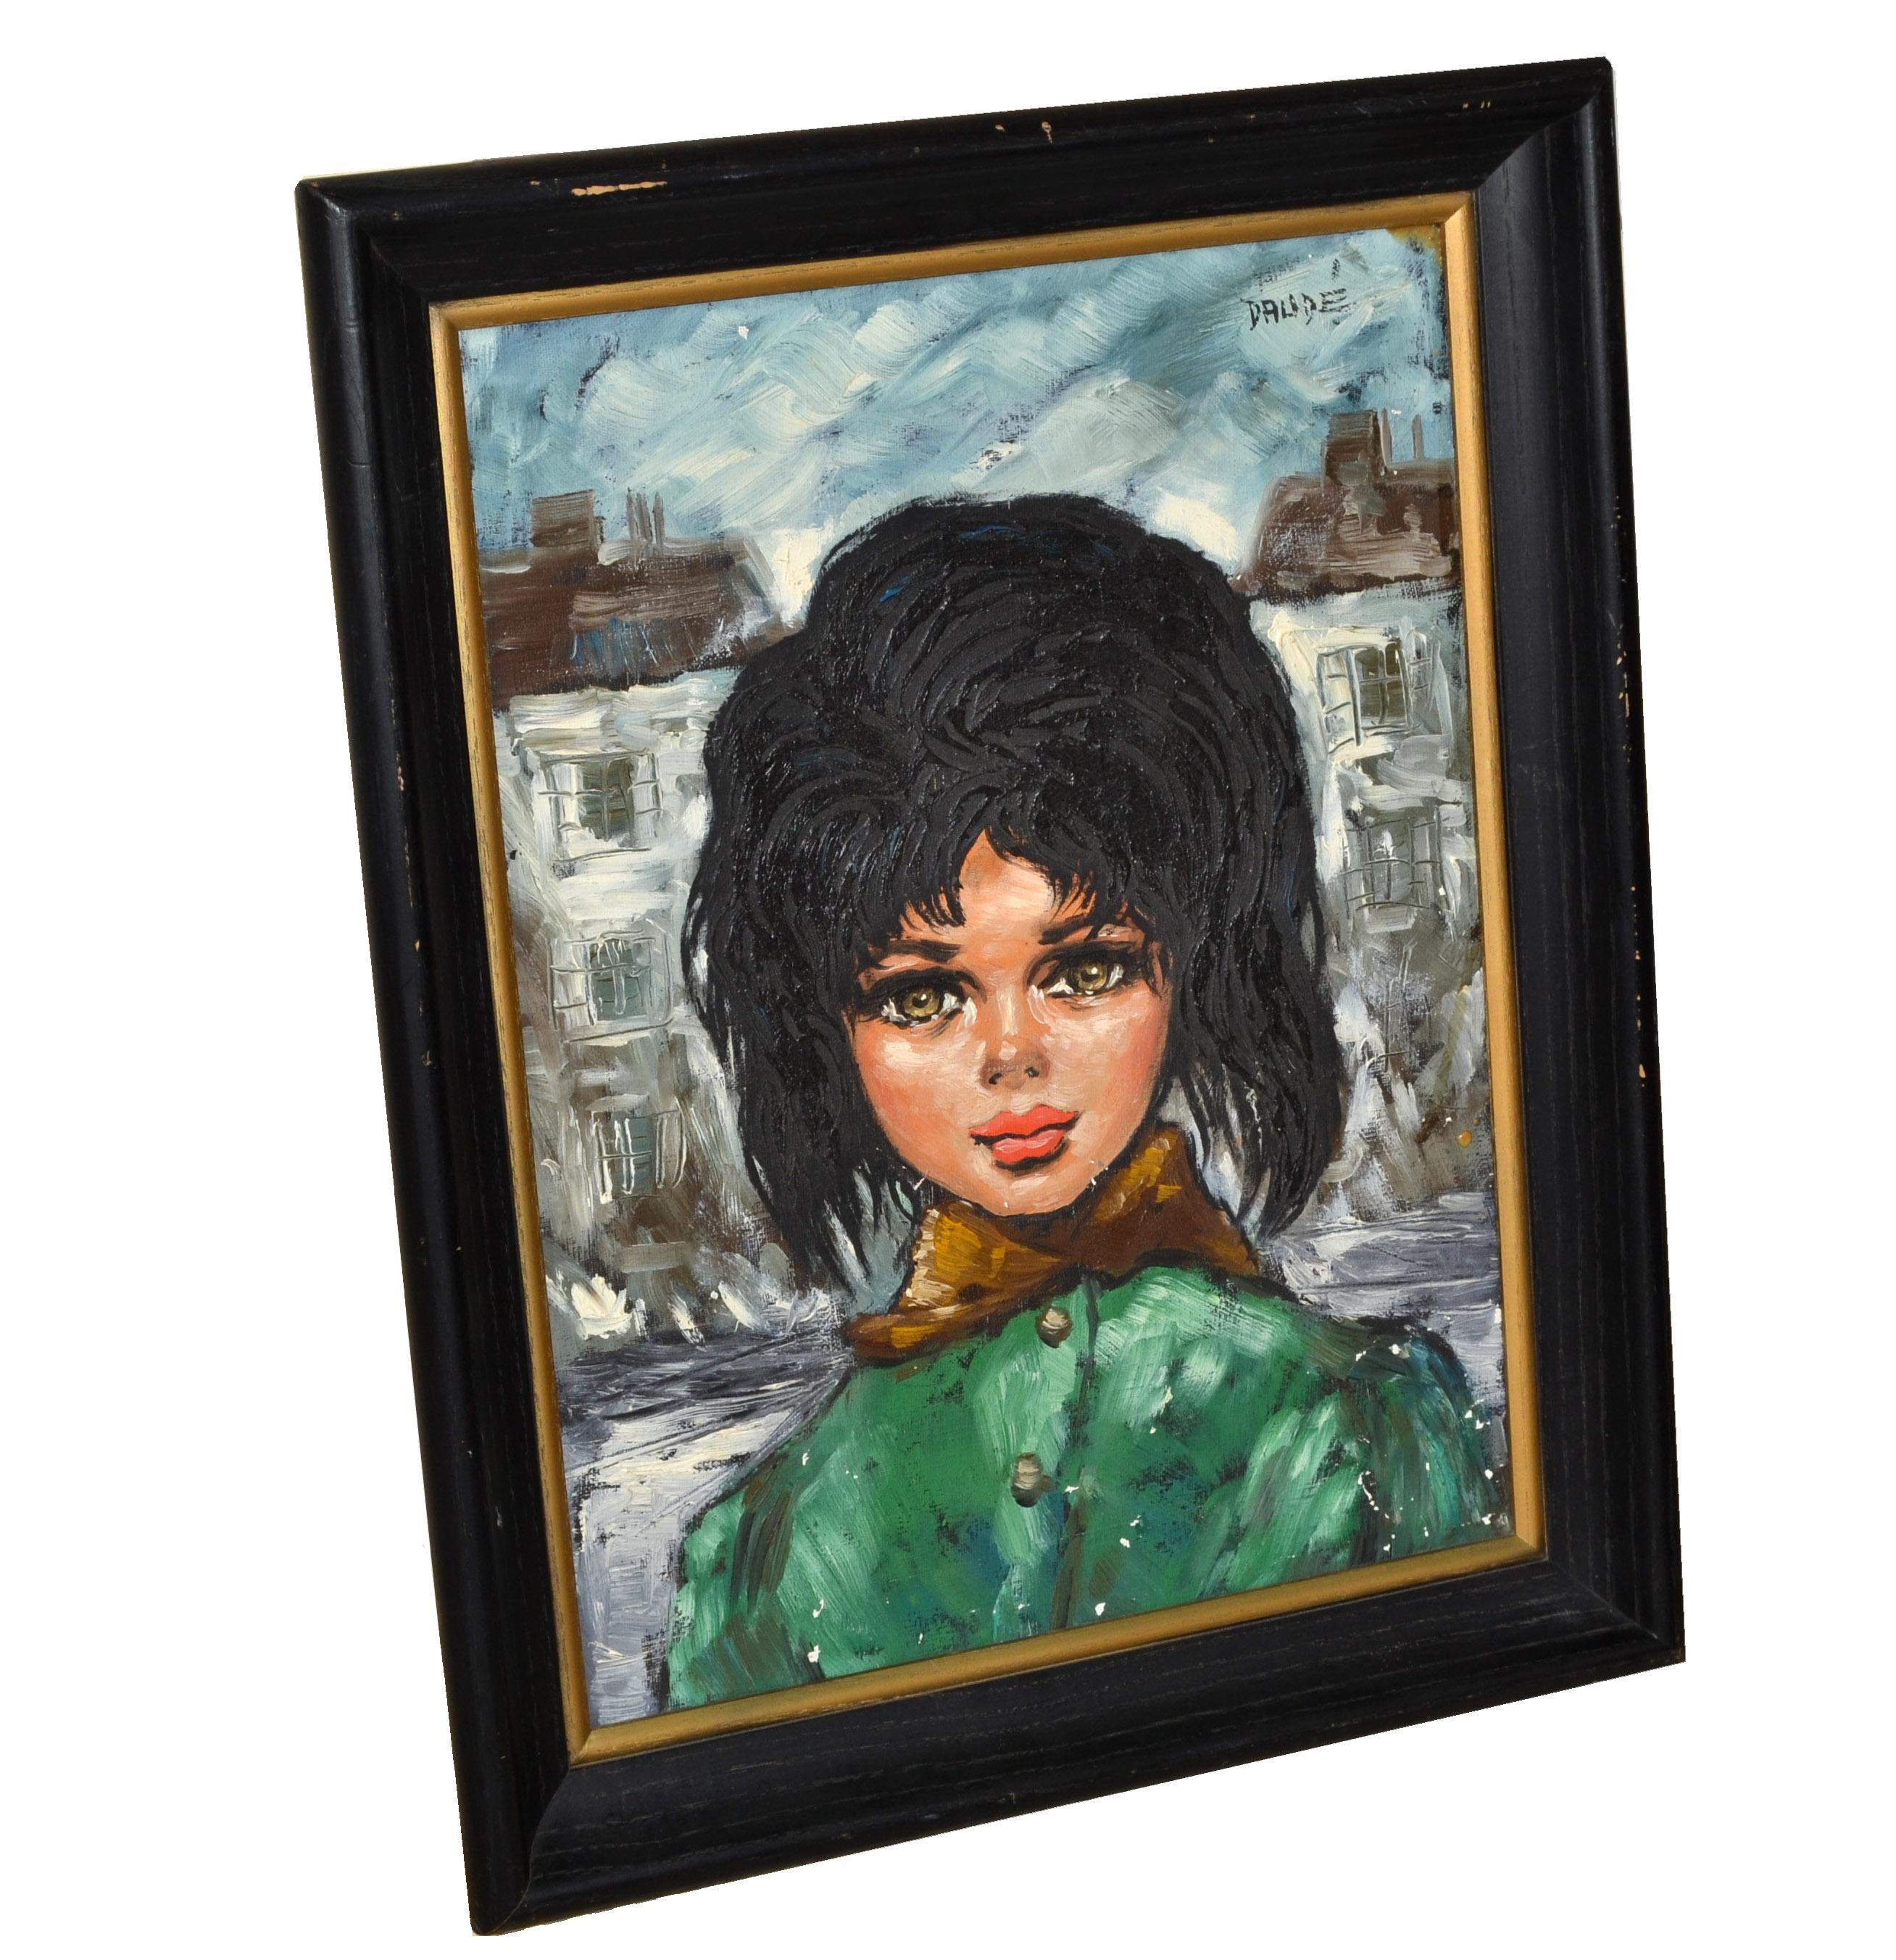 Framed signed Daude Vintage Mid-Century Oil Painting Cityscape French Girl with Black Hair Brown Eyes Green Coat.
Circa 1960’s oil painting on canvas depicting a young girl with jet black hair and brown eyes wearing a bright green fur collar coat